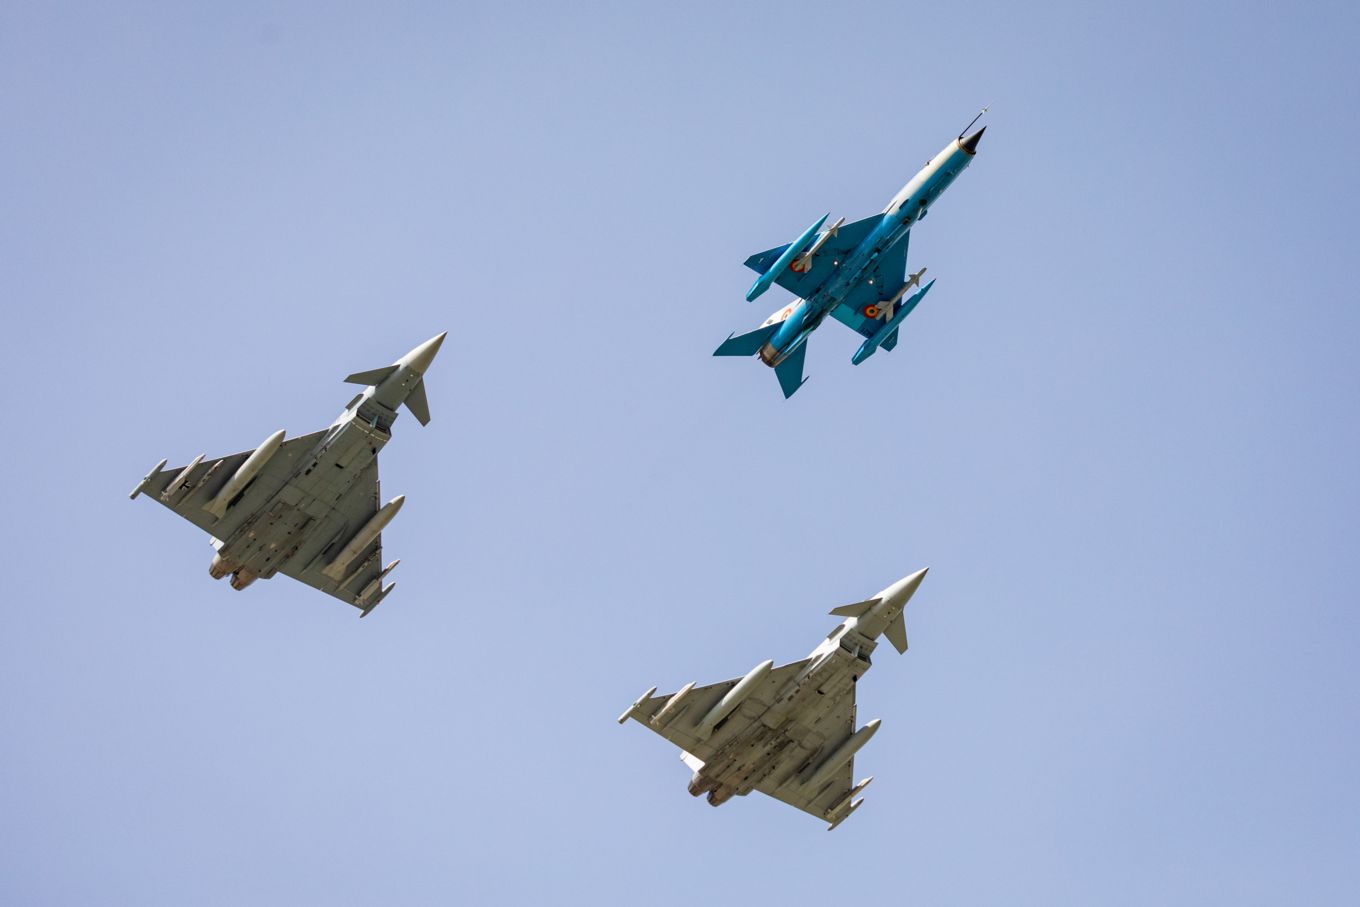 RAF Typhoon, German Eurofighter and Romanian MIG 21 LanceR fly in formation.